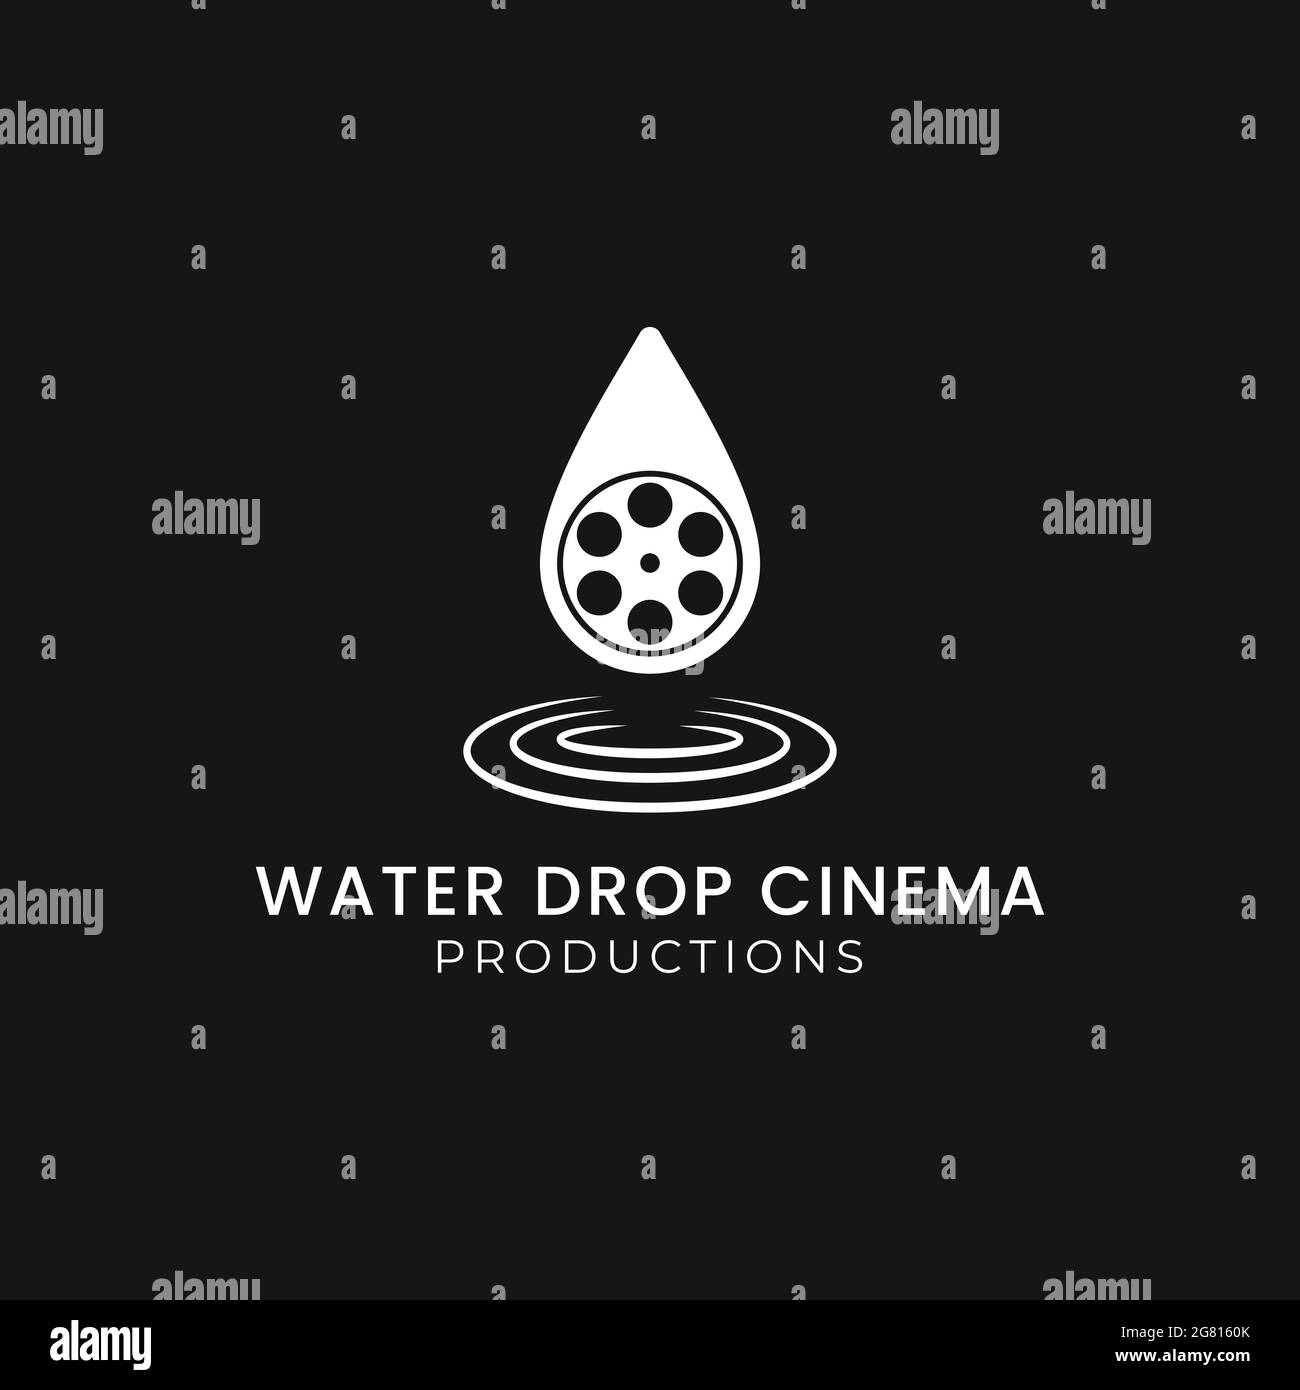 water drop cinema Movie Studio, Cinematography Film roll production concept with water drop logo design vector illustration icon Isolated black Backgr Stock Vector